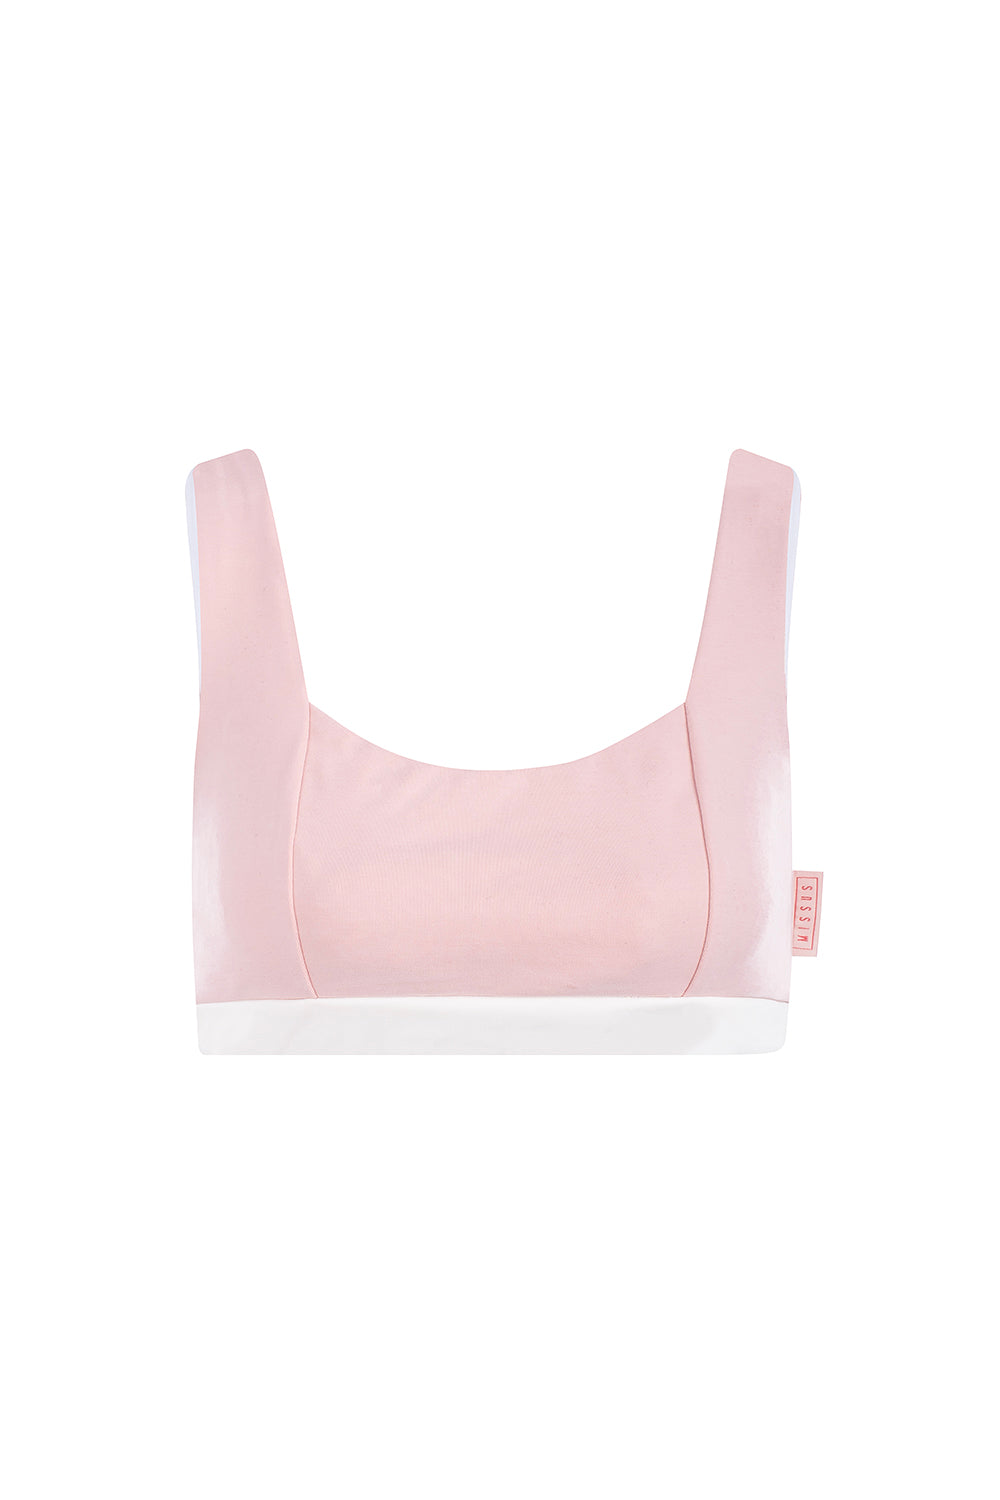 SOFT TOUCH PINK CROP TOP